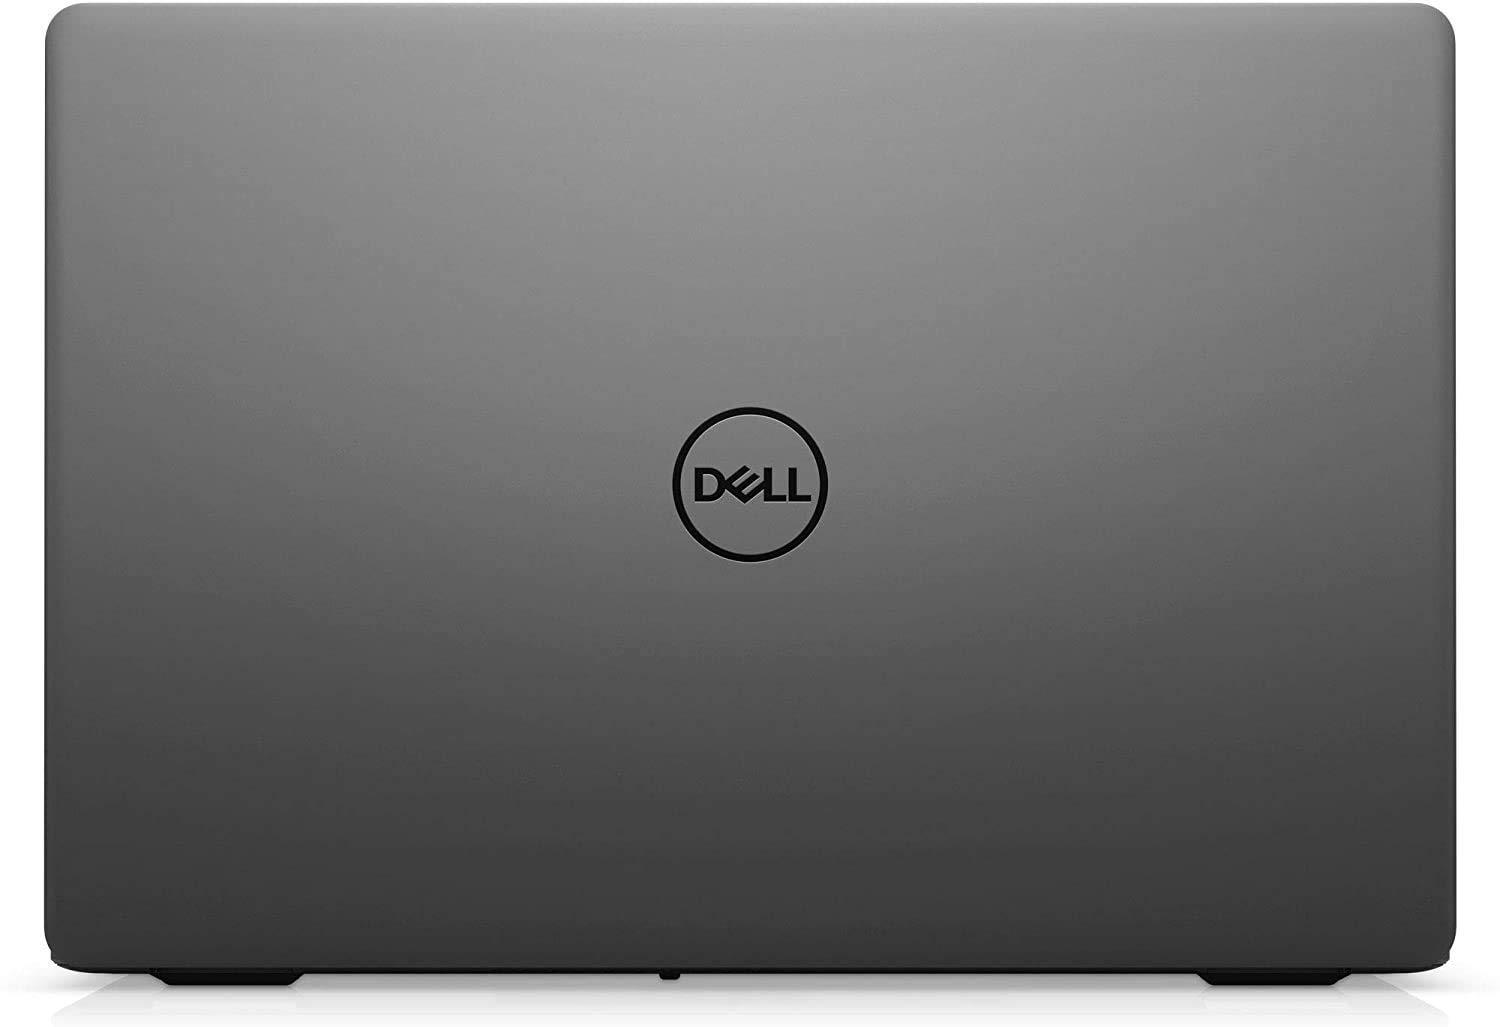 Dell Laptop Inspiron 3501, Core i5, 11th Gen, Iris Graphics With Shared Graphics Memory